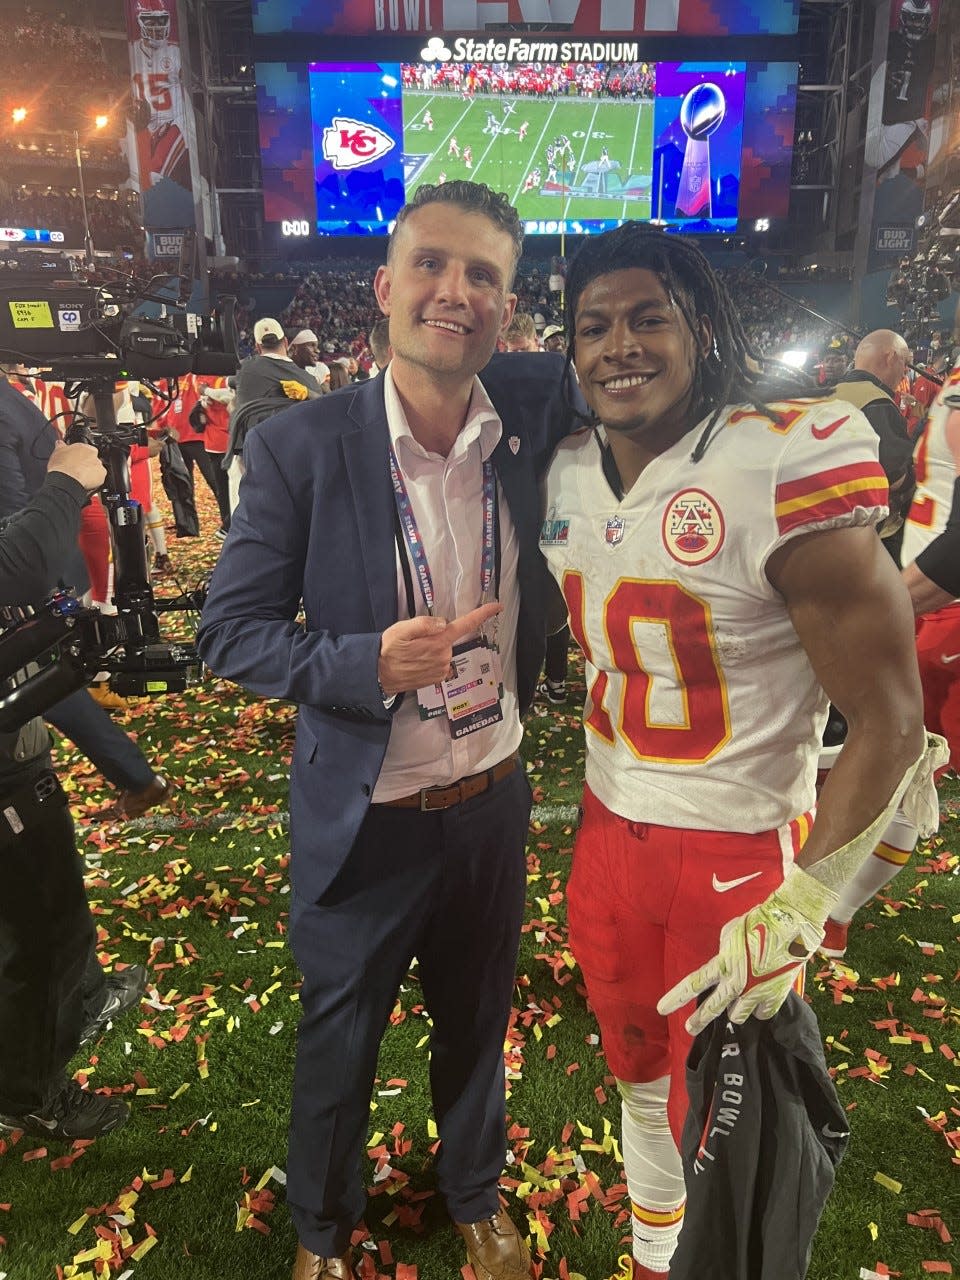 Cassidy Kaminski and Kansas City Chiefs running back Isiah Pacheco pose together after the Chiefs won the Super Bowl earlier this month. Kaminski scouted Pacheco before the draft last year.